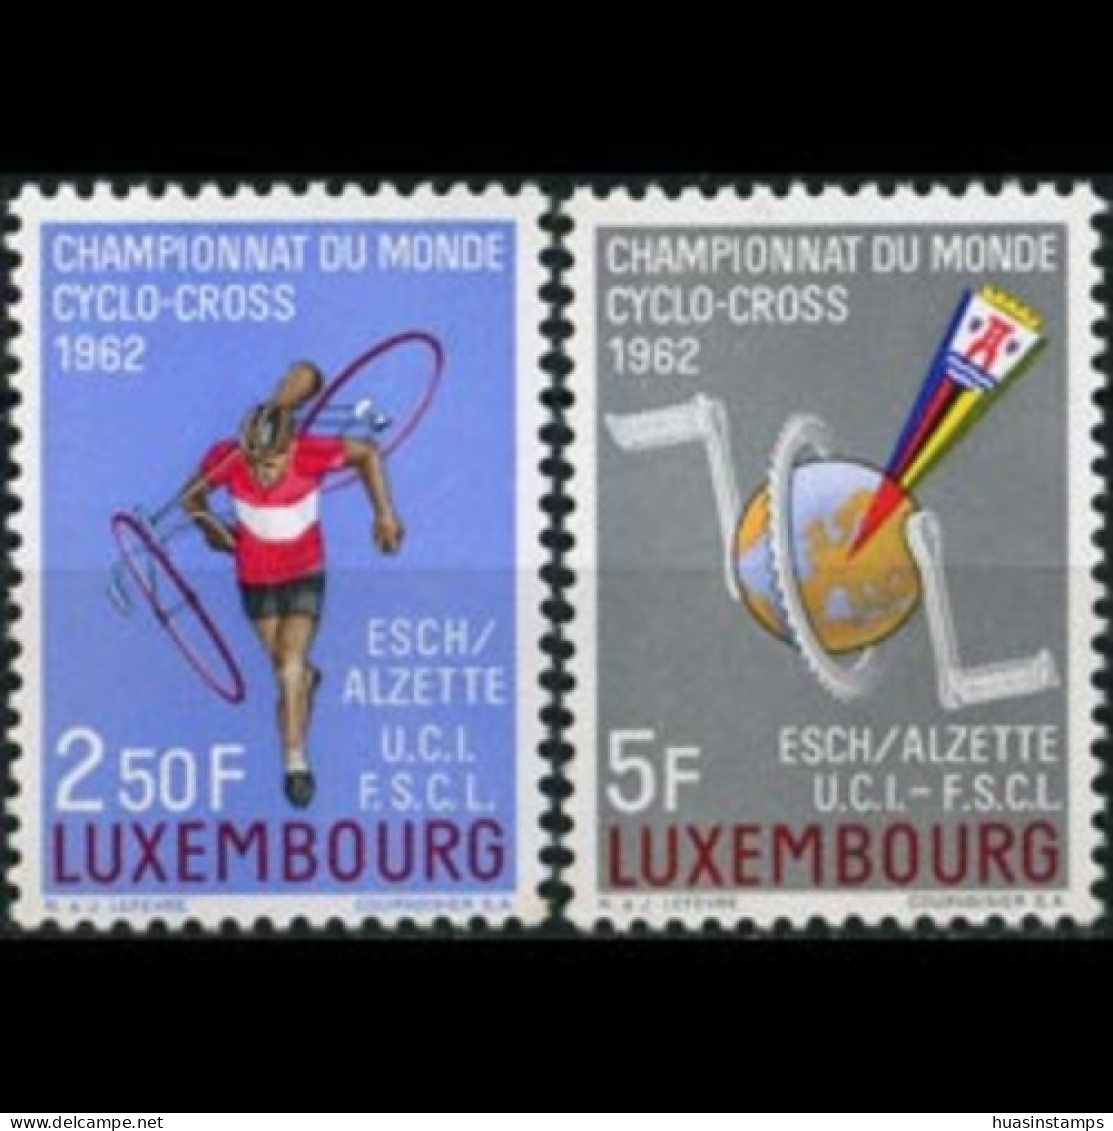 LUXEMBOURG 1962 - Scott# 384-5 Bicycle Race Set Of 2 LH - Unused Stamps